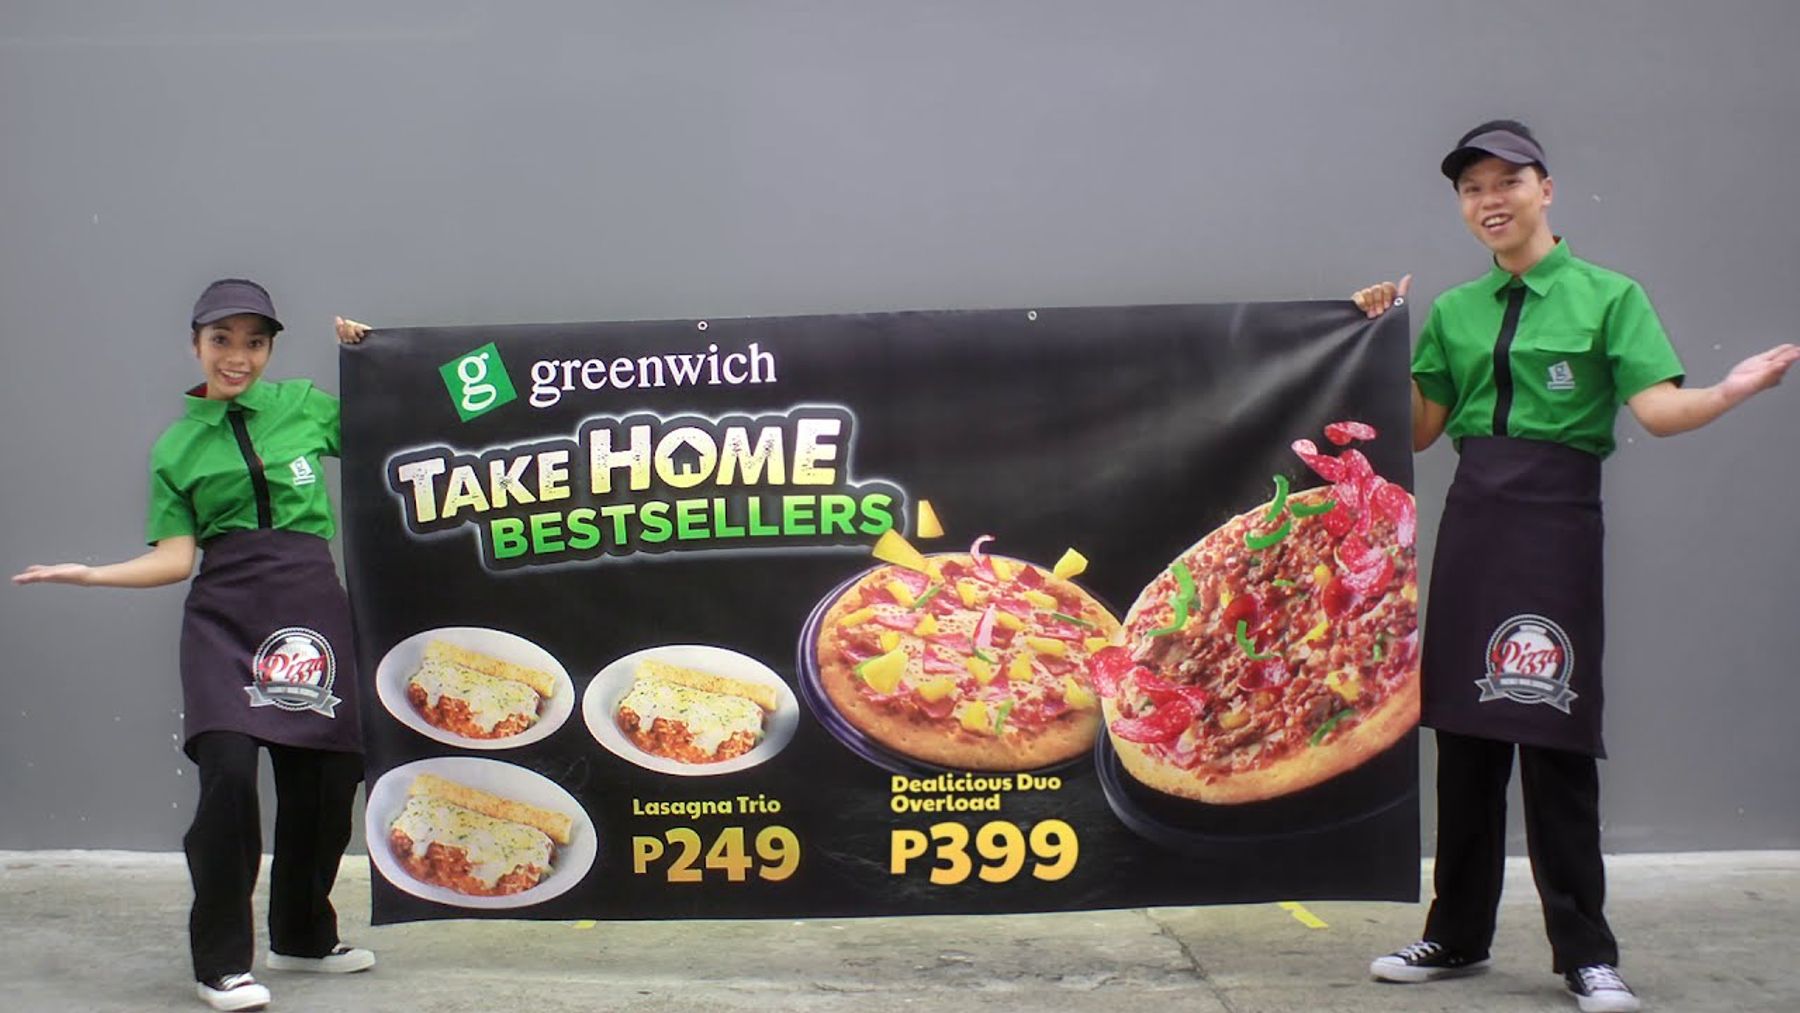 a man and a woman dressed in green hold up a black banner with photos of pizza and lasagna on it